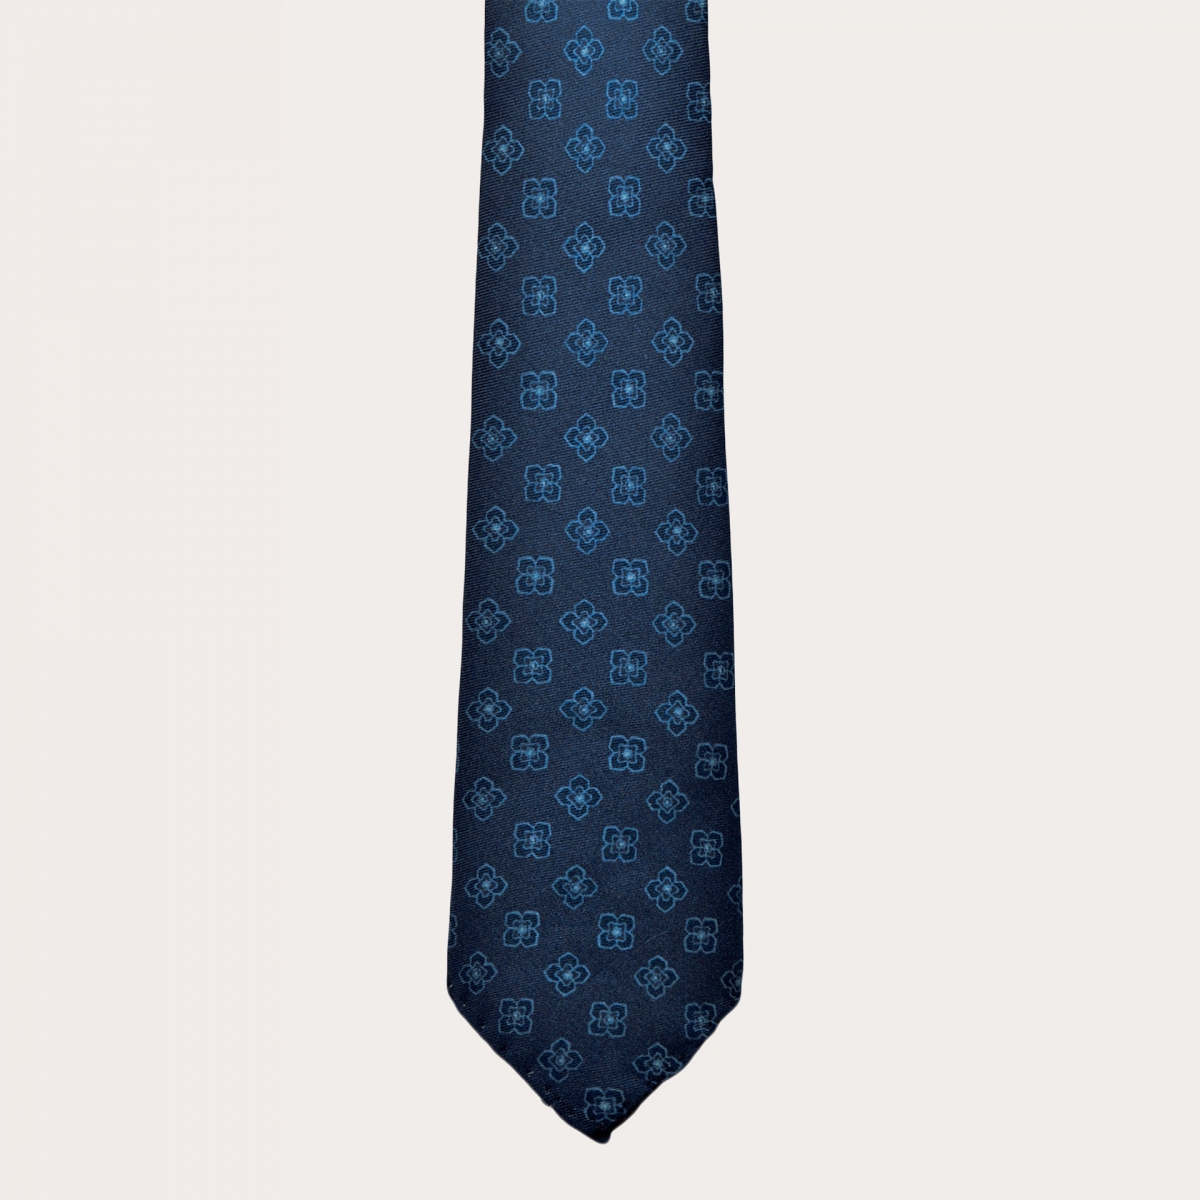 BRUCLE Silk tie and pocket square set, blue floral pattern